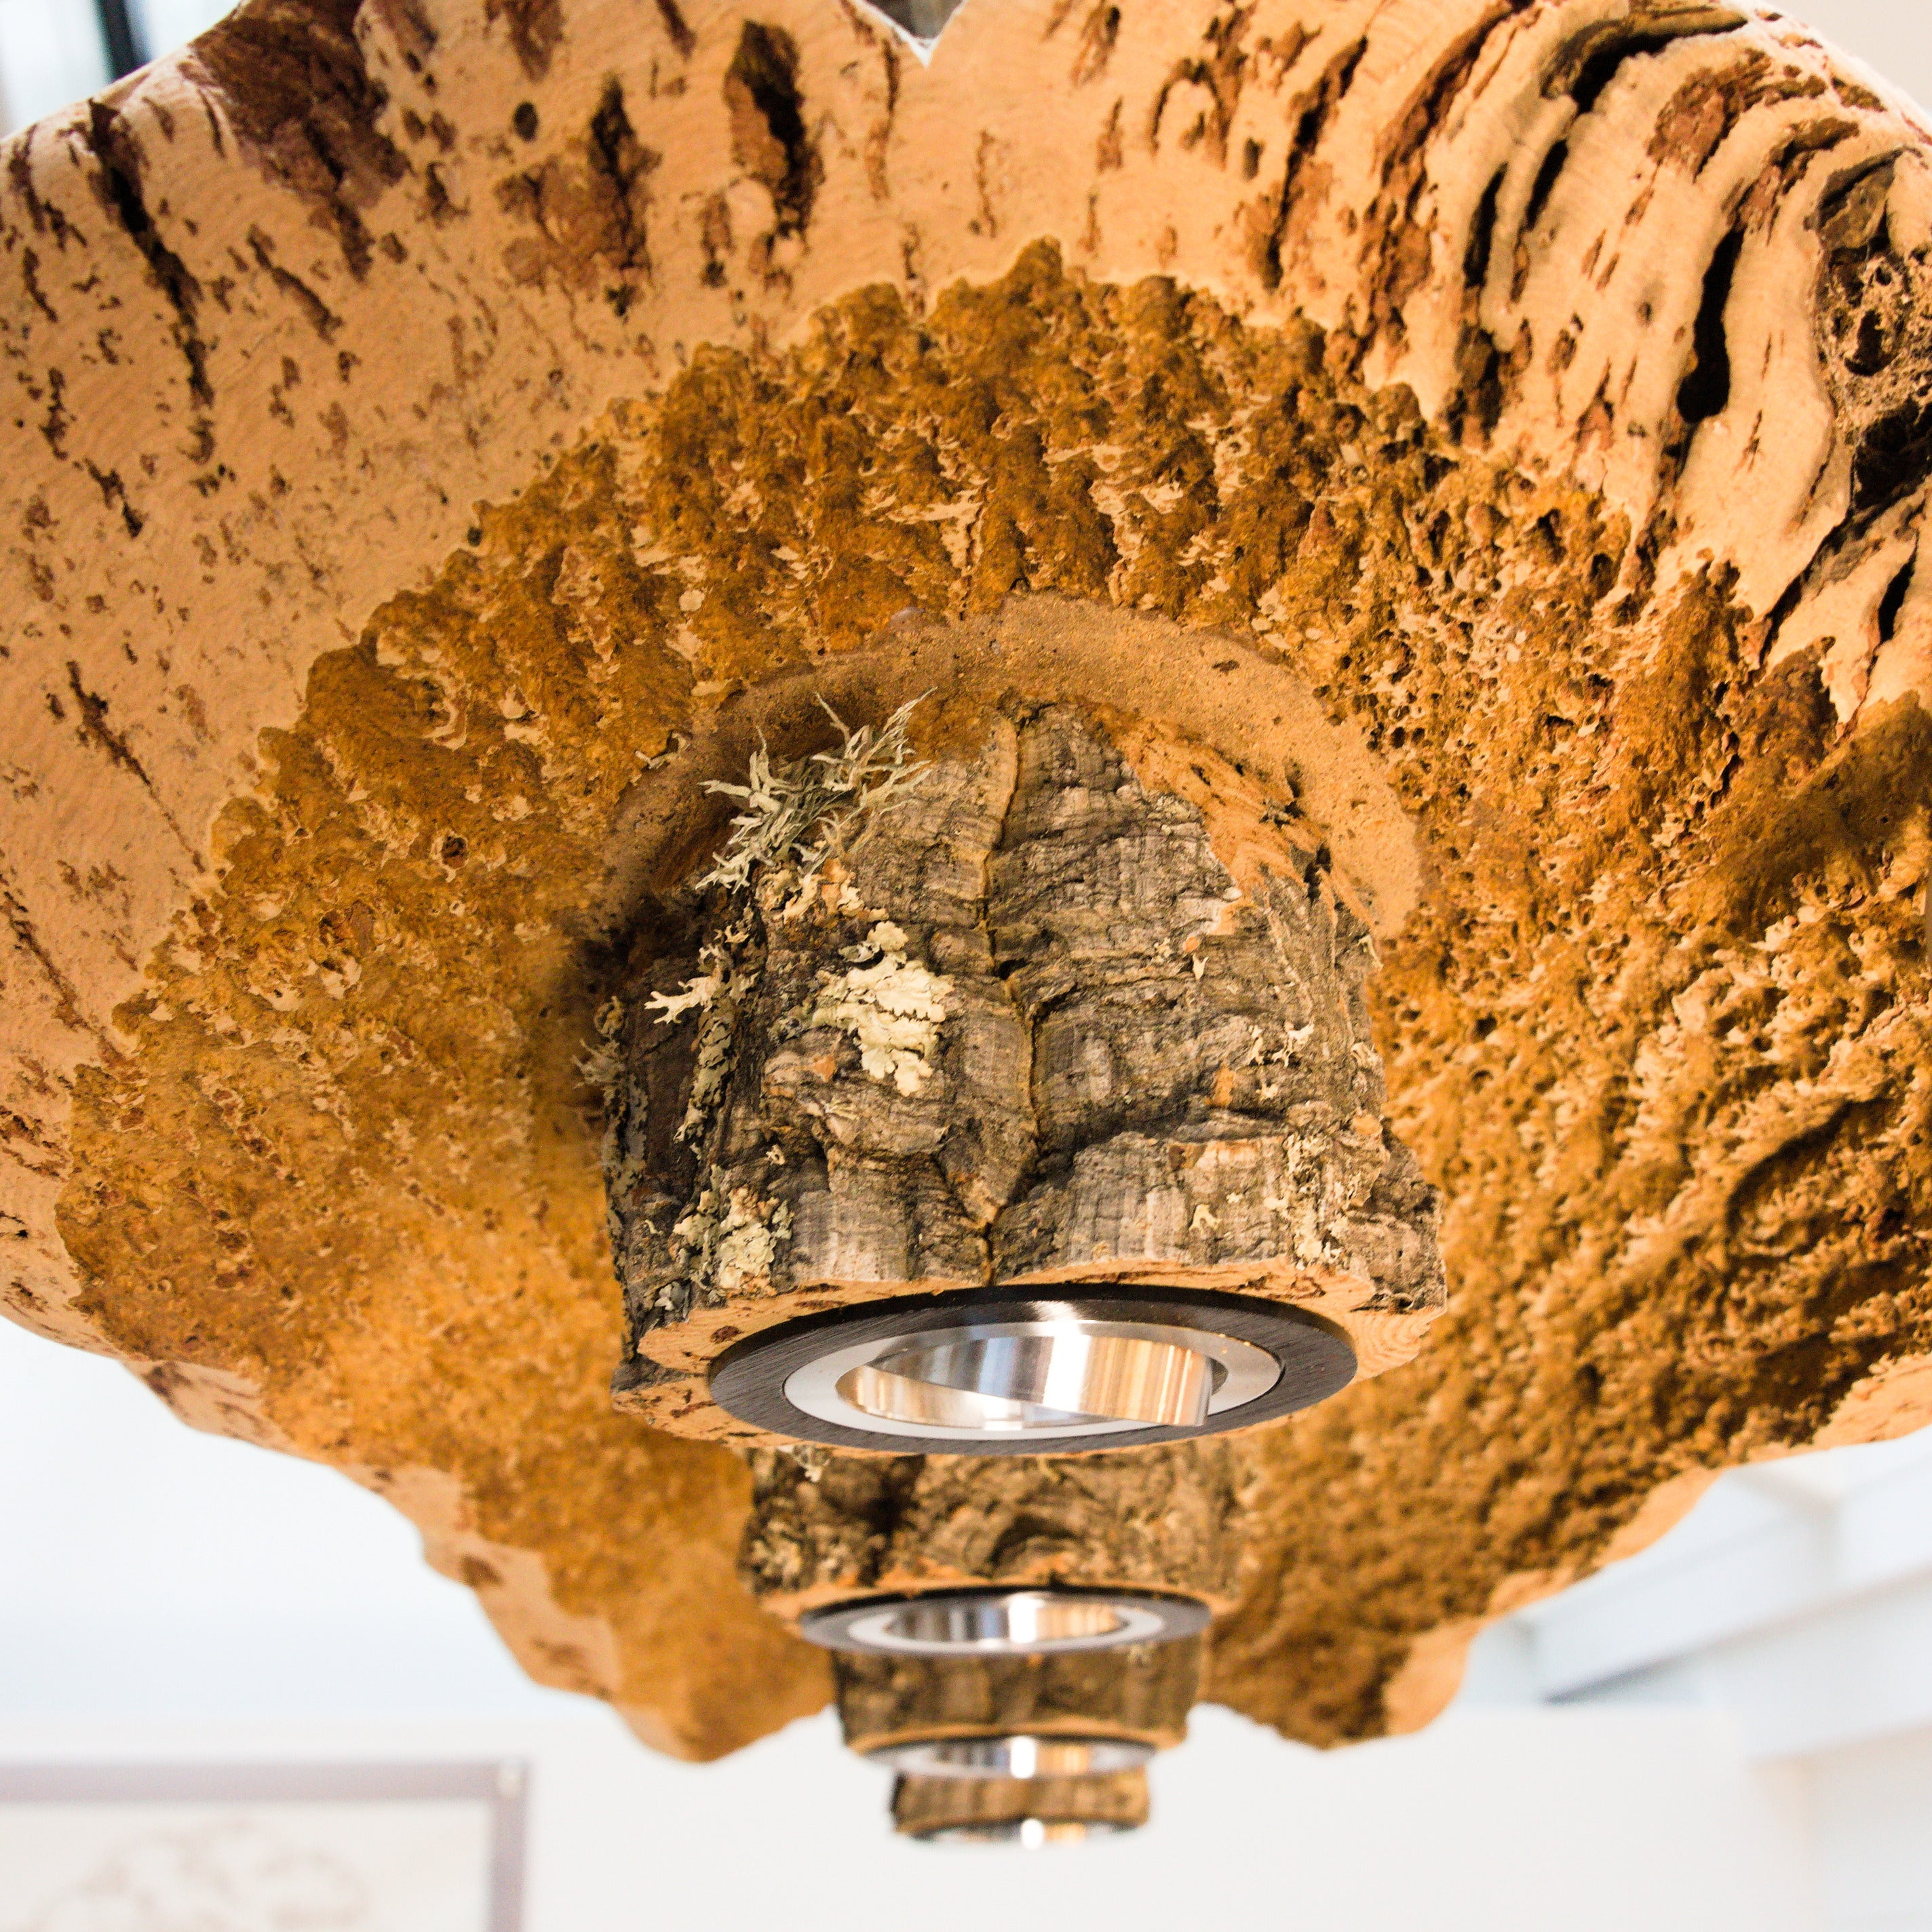 VERKORKst premium hanging lamp made of cork bark * rustic ceiling light * exclusive vintage hanging lamp in country style * dining room dining table